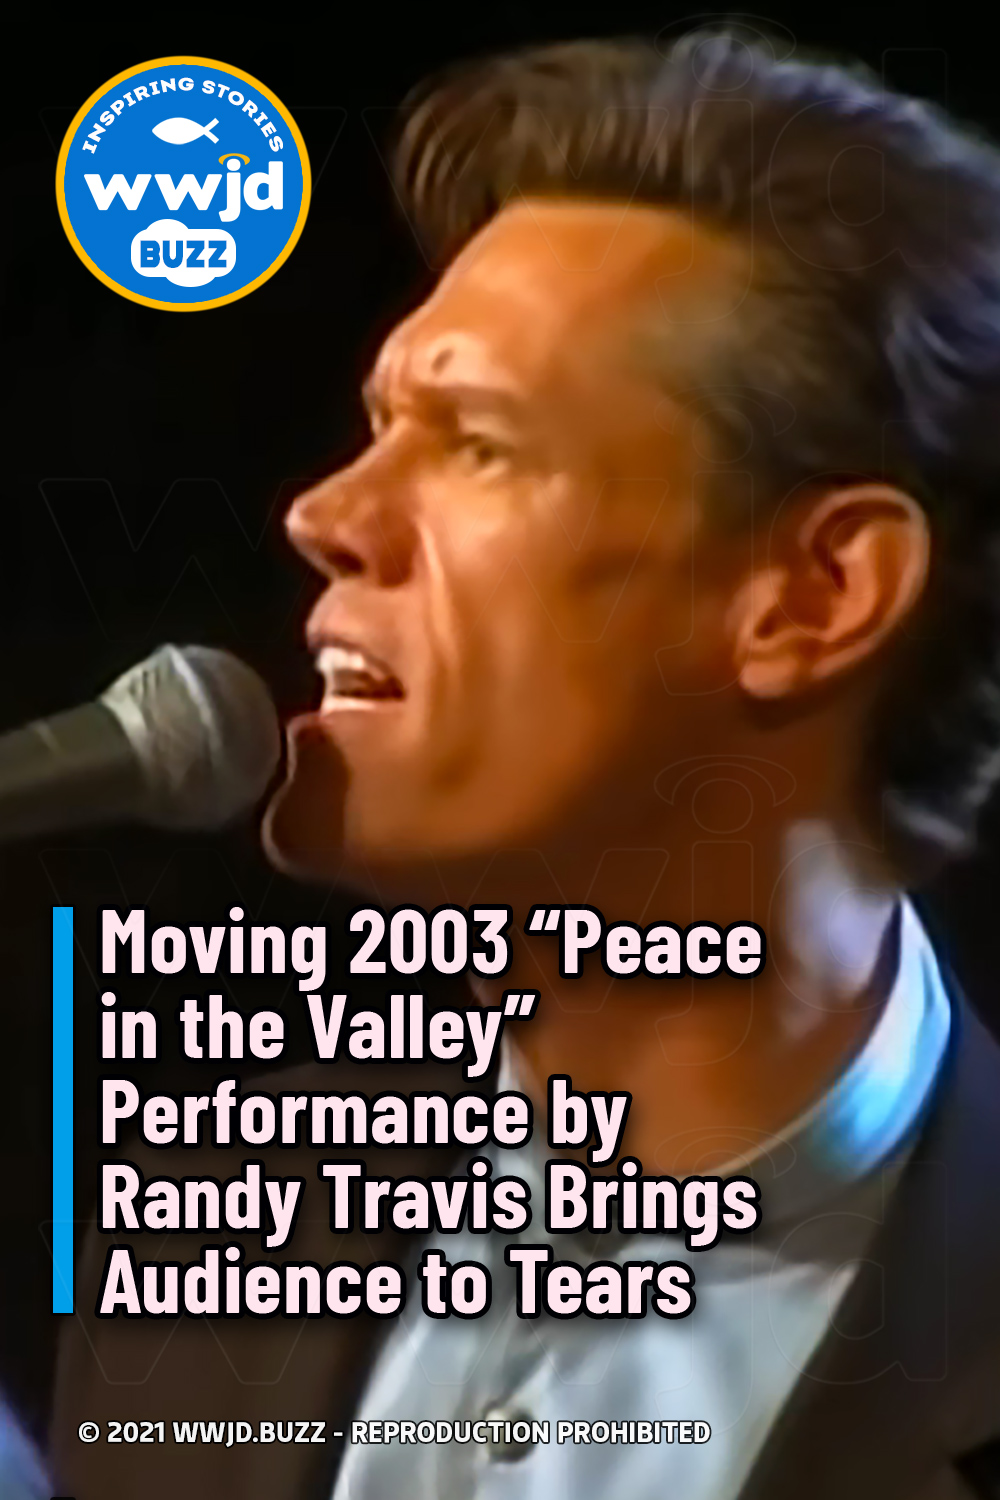 Moving 2003 “Peace in the Valley” Performance by Randy Travis Brings Audience to Tears